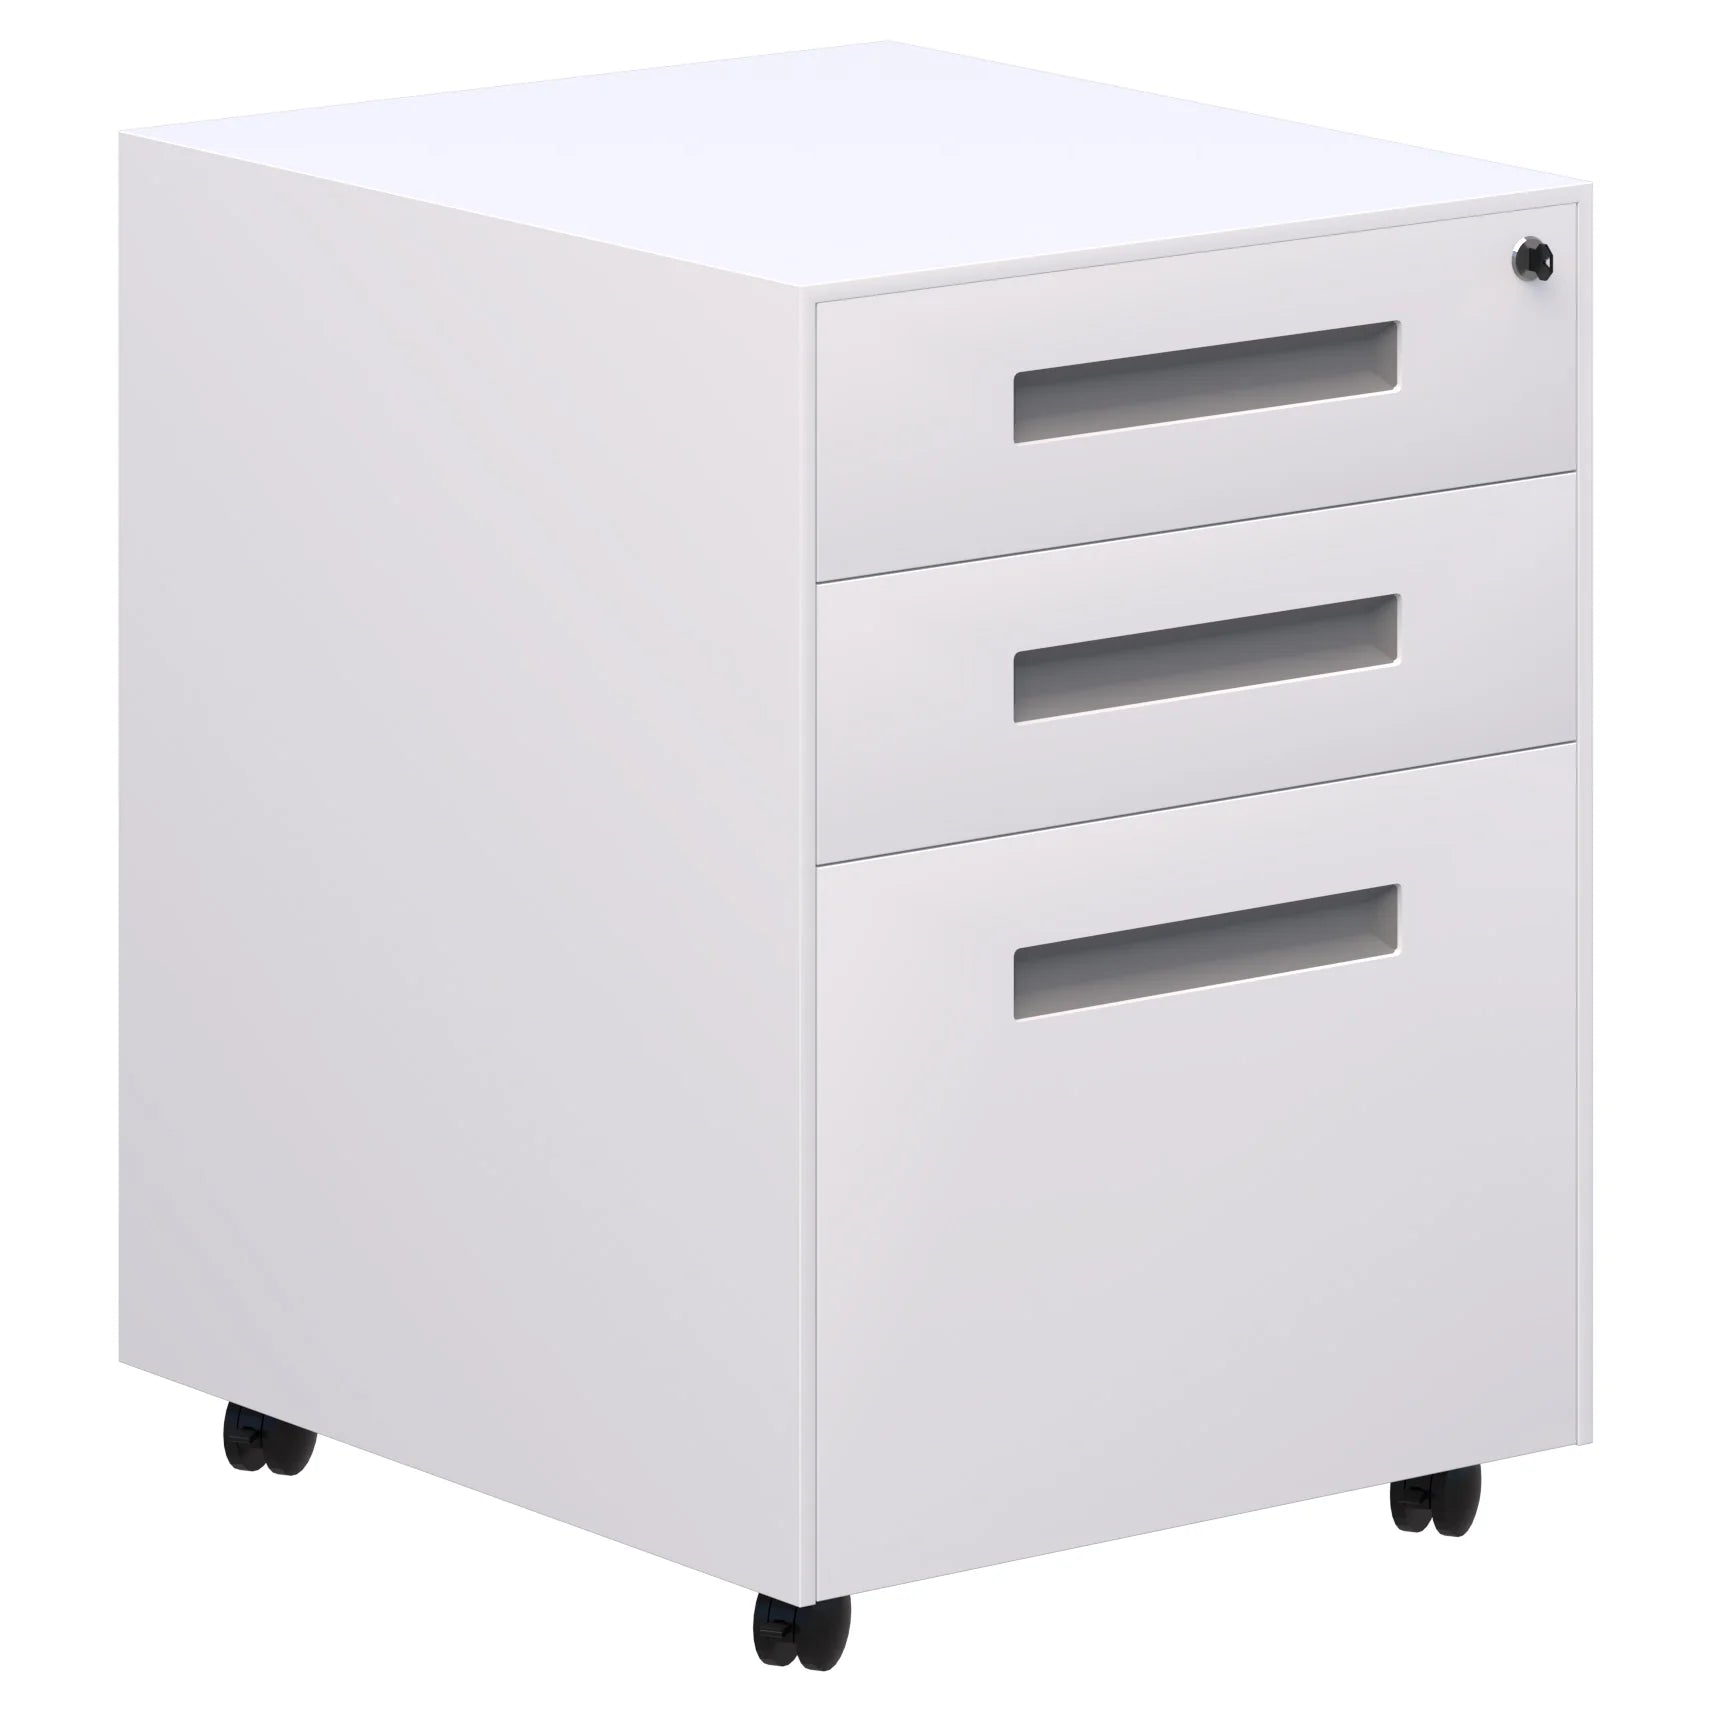 Lockable Spectrum metal mobile with two stationery drawers and 1 file draw in white with grey handles.